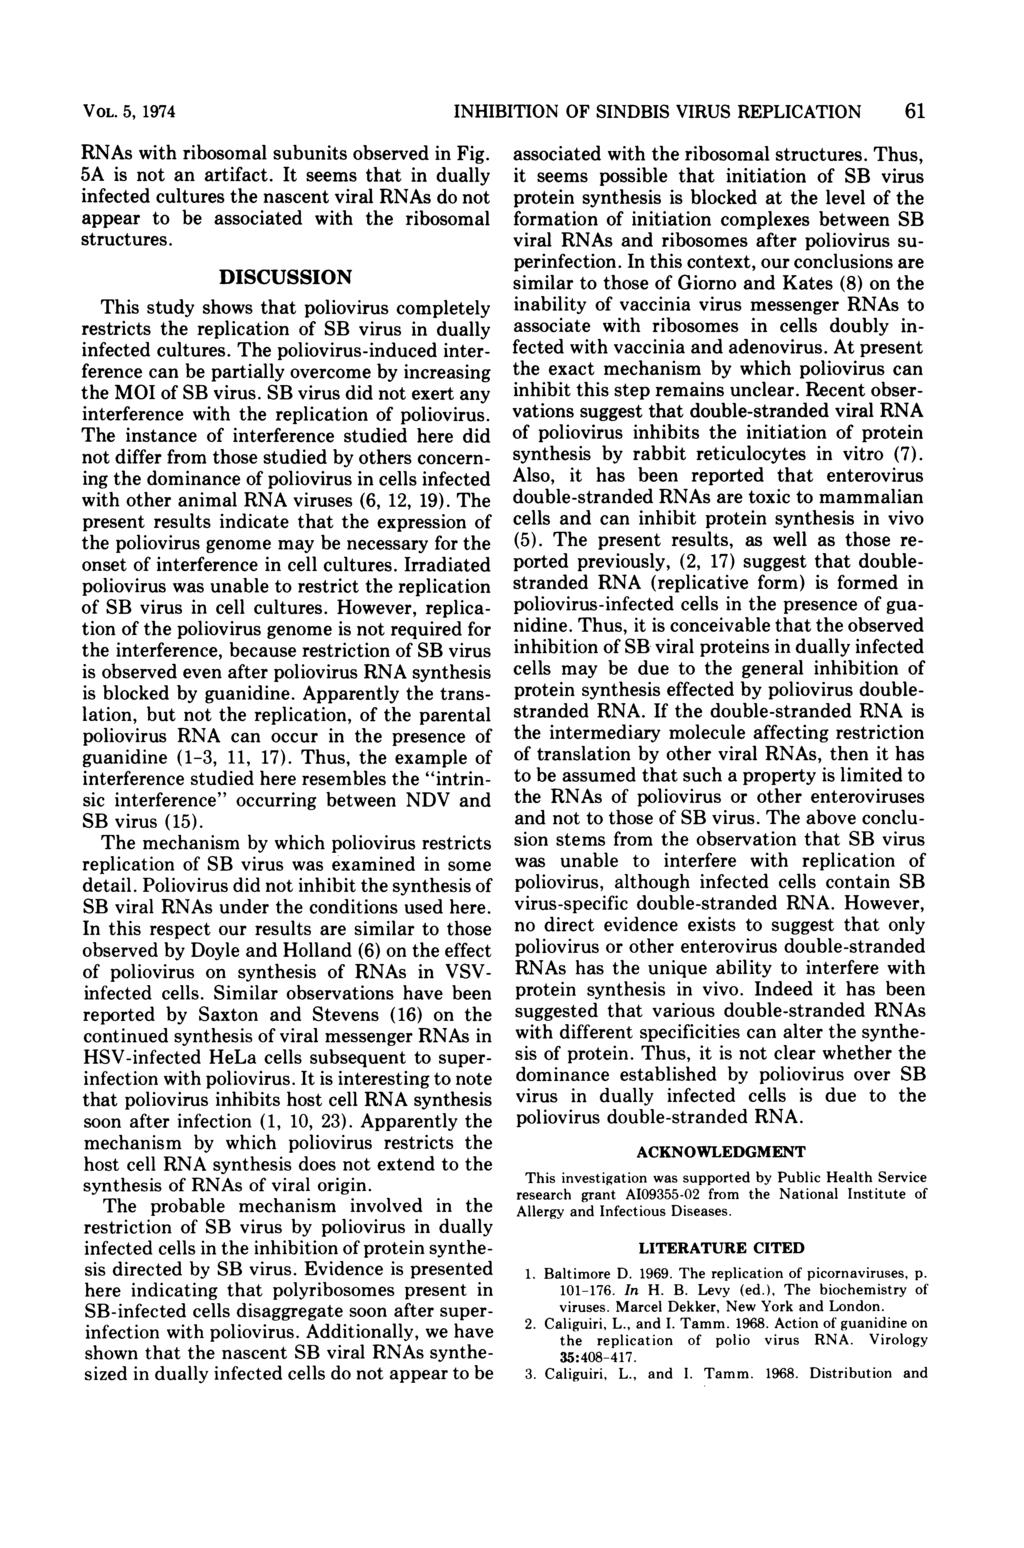 VOL. 5, 1974 INHIBITION OF SINDBIS VIRUS REPLICATION 61 RNAs with ribosomal subunits observed in Fig. 5A is not an artifact.